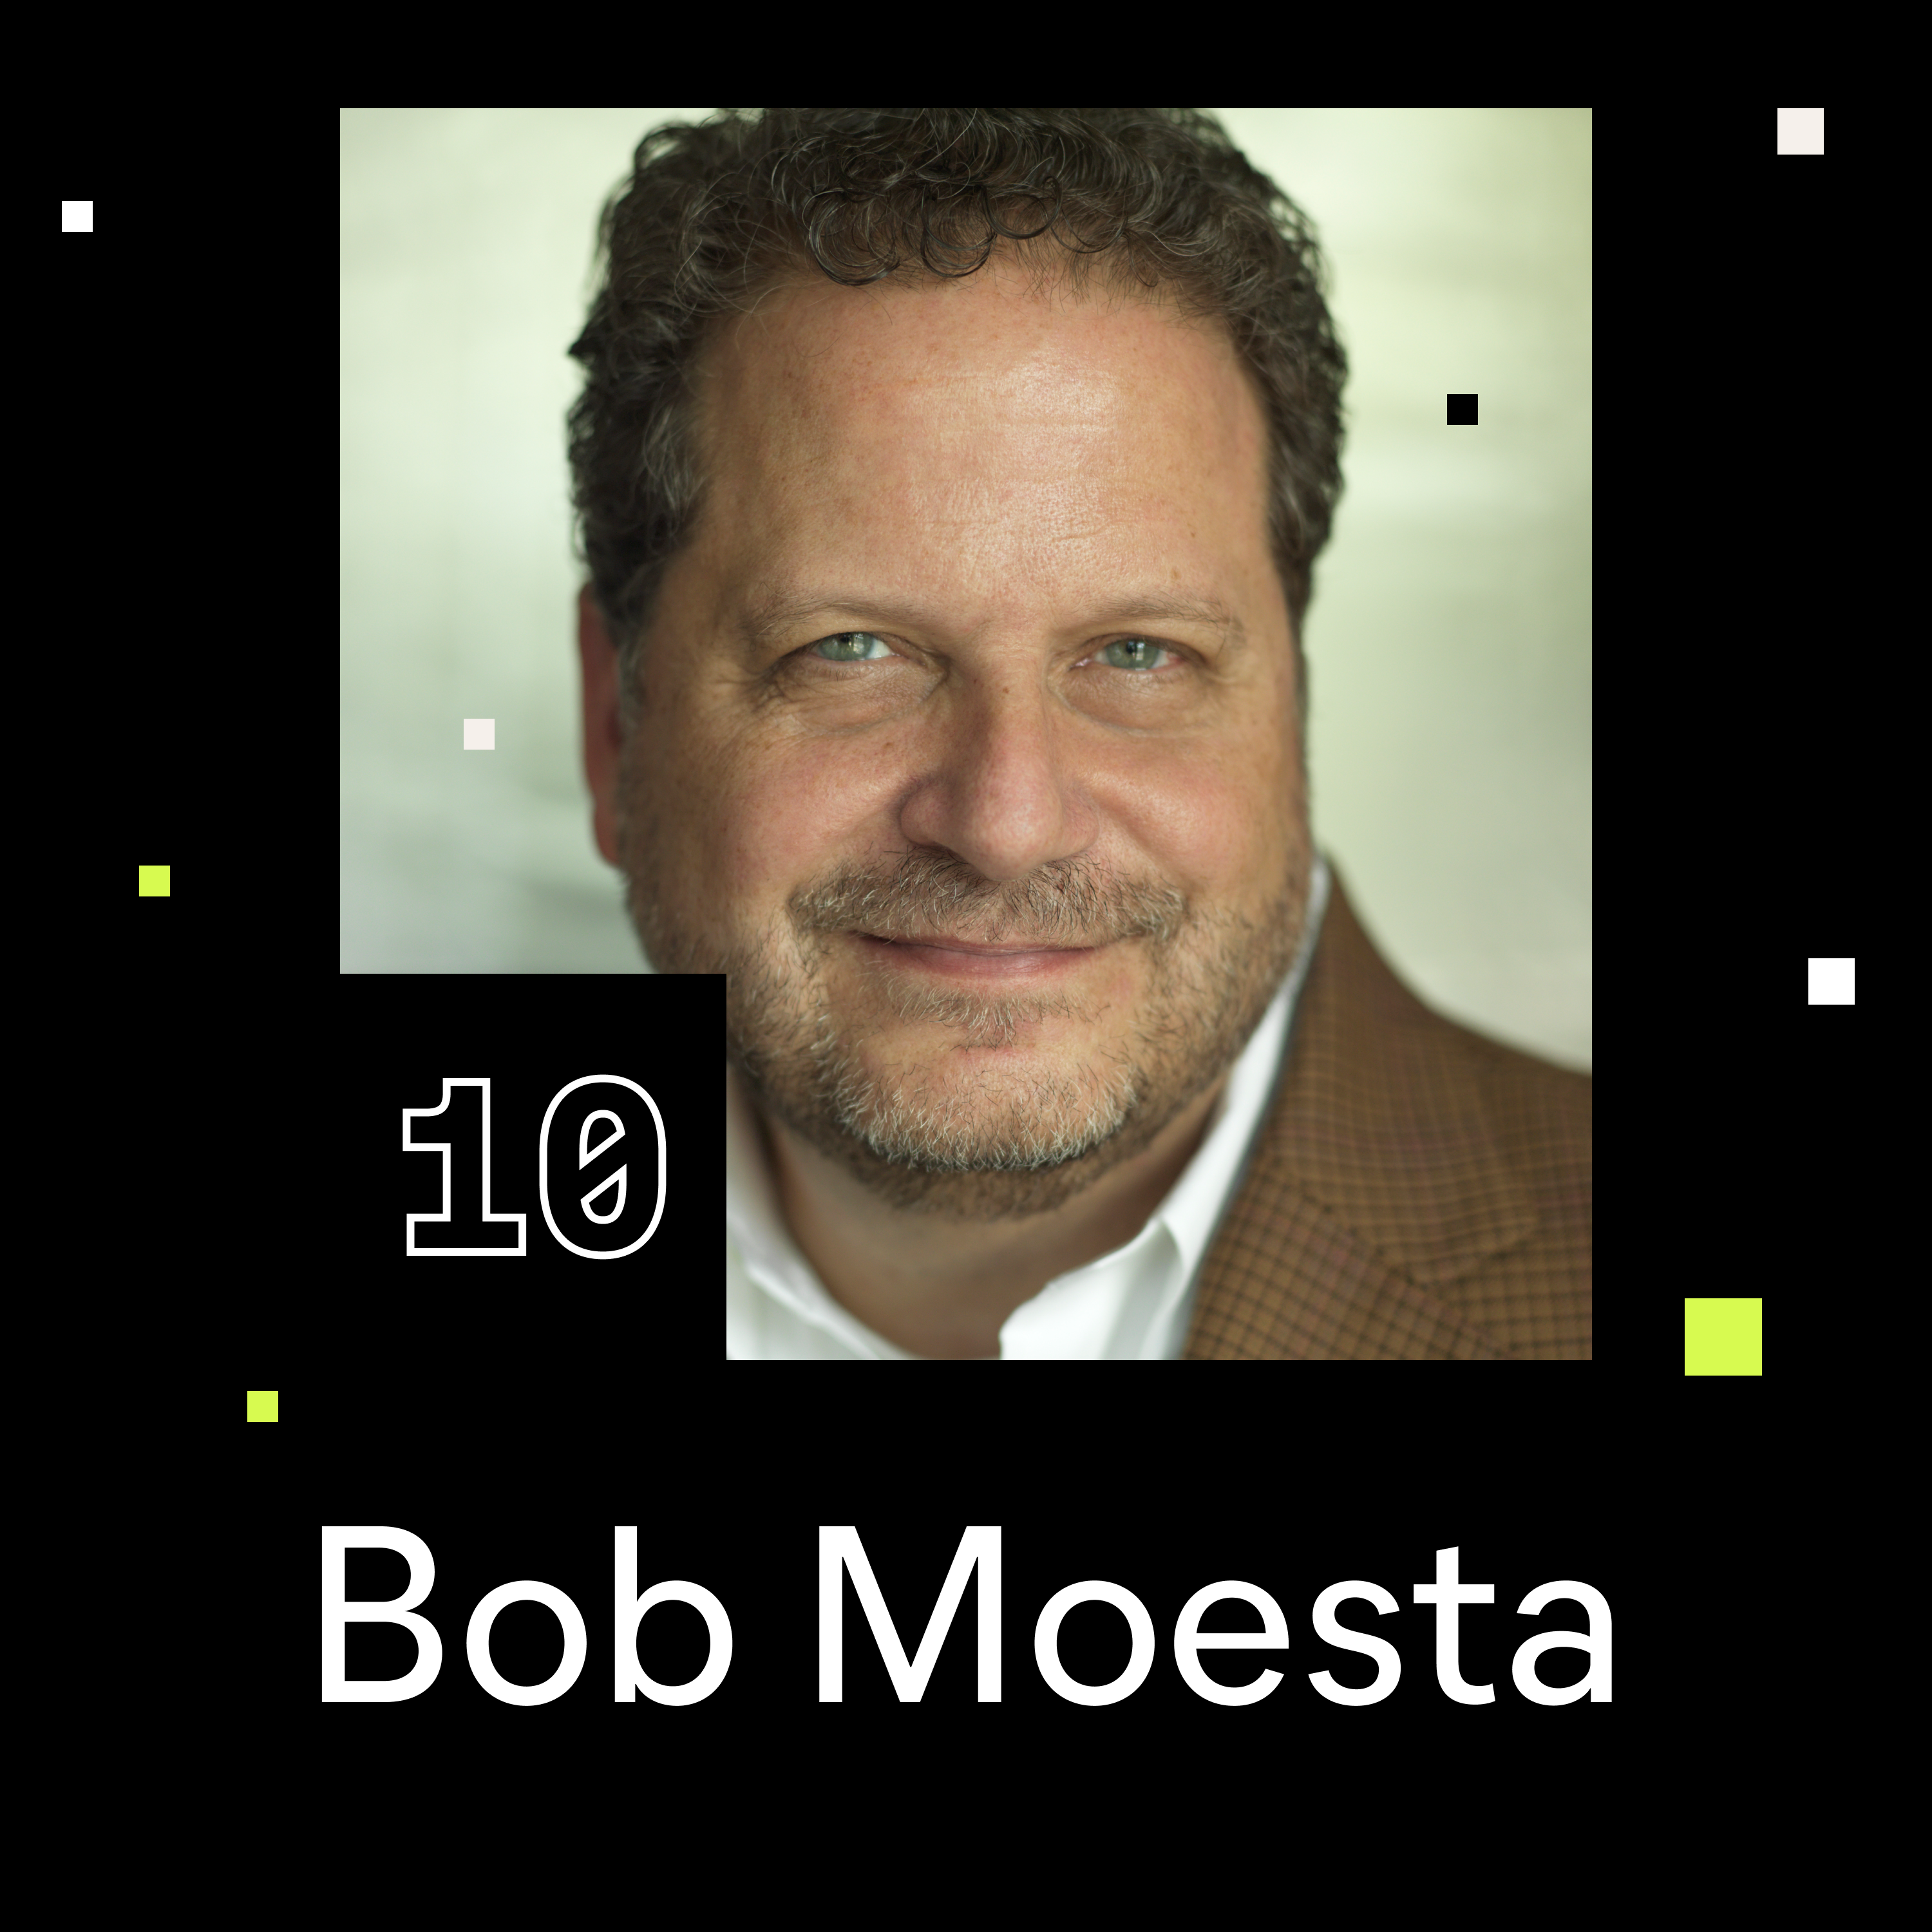 Potrait of the innovator and founder of the rewired group Bob Moesta.